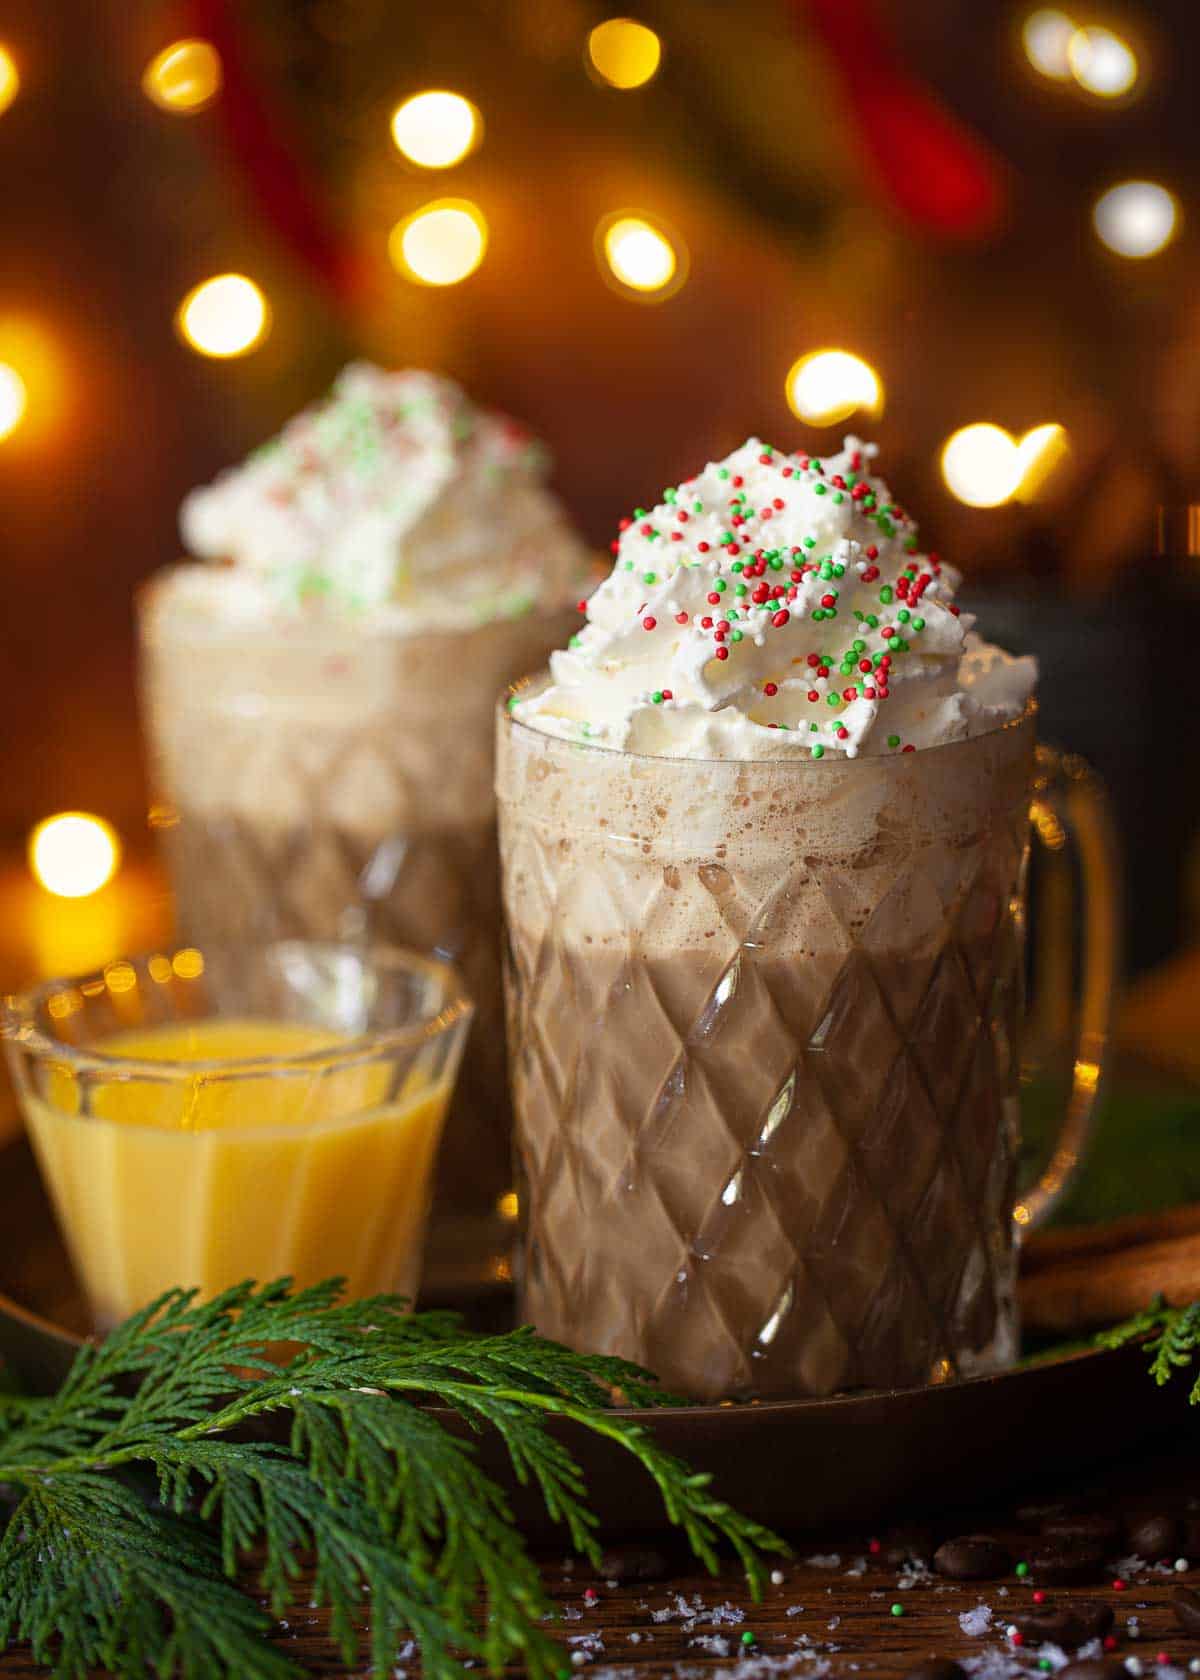 Two glass mugs filled with Christmas coffee and topped with whipped cream and sprinkles.